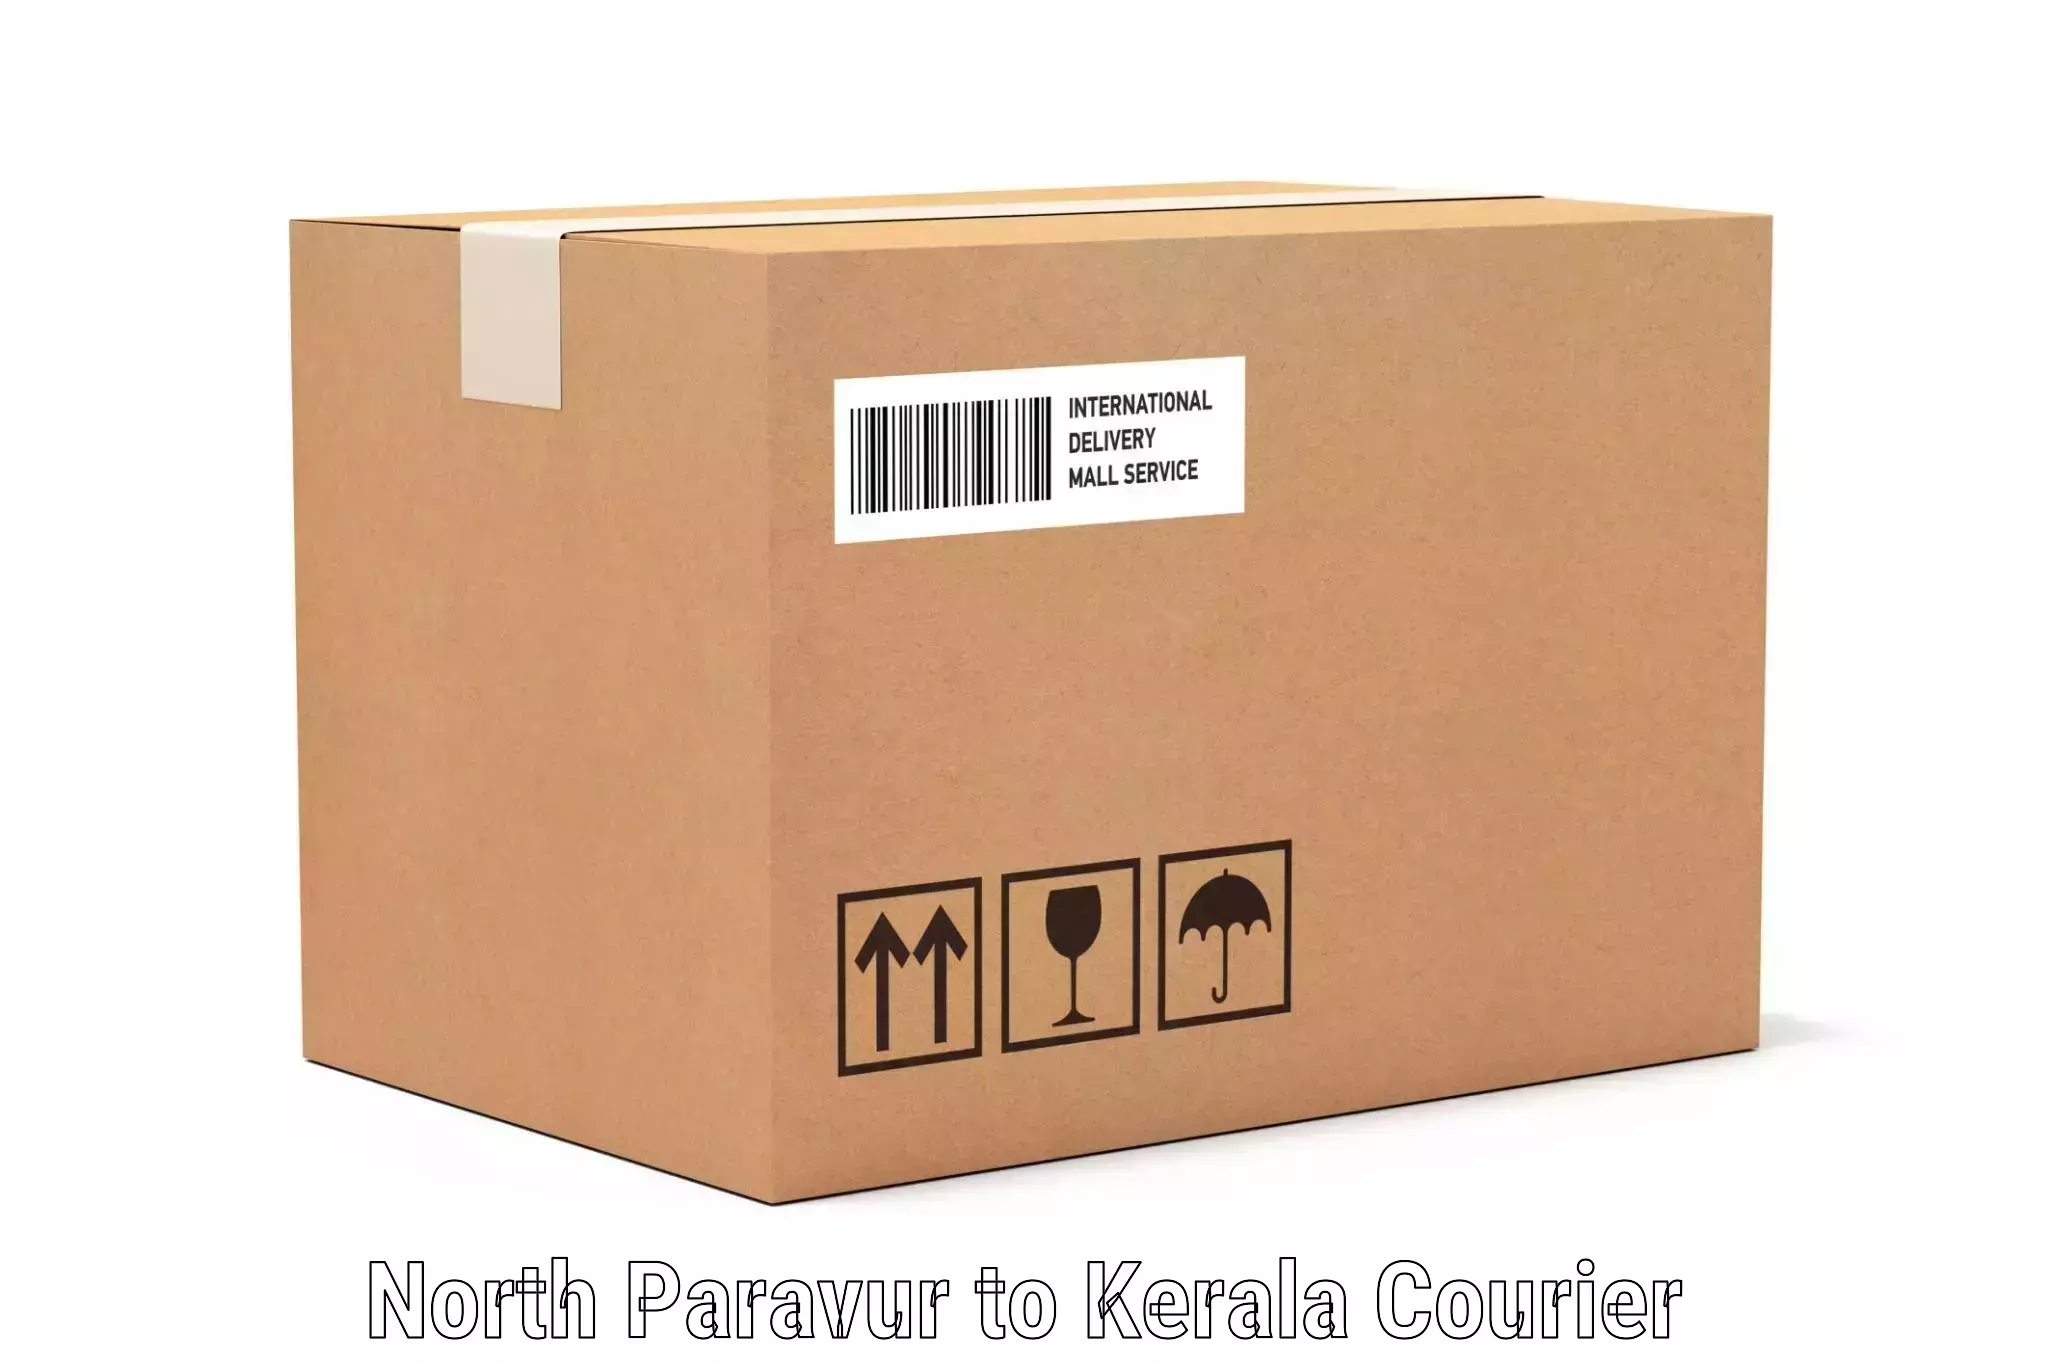 Baggage shipping service in North Paravur to Kerala